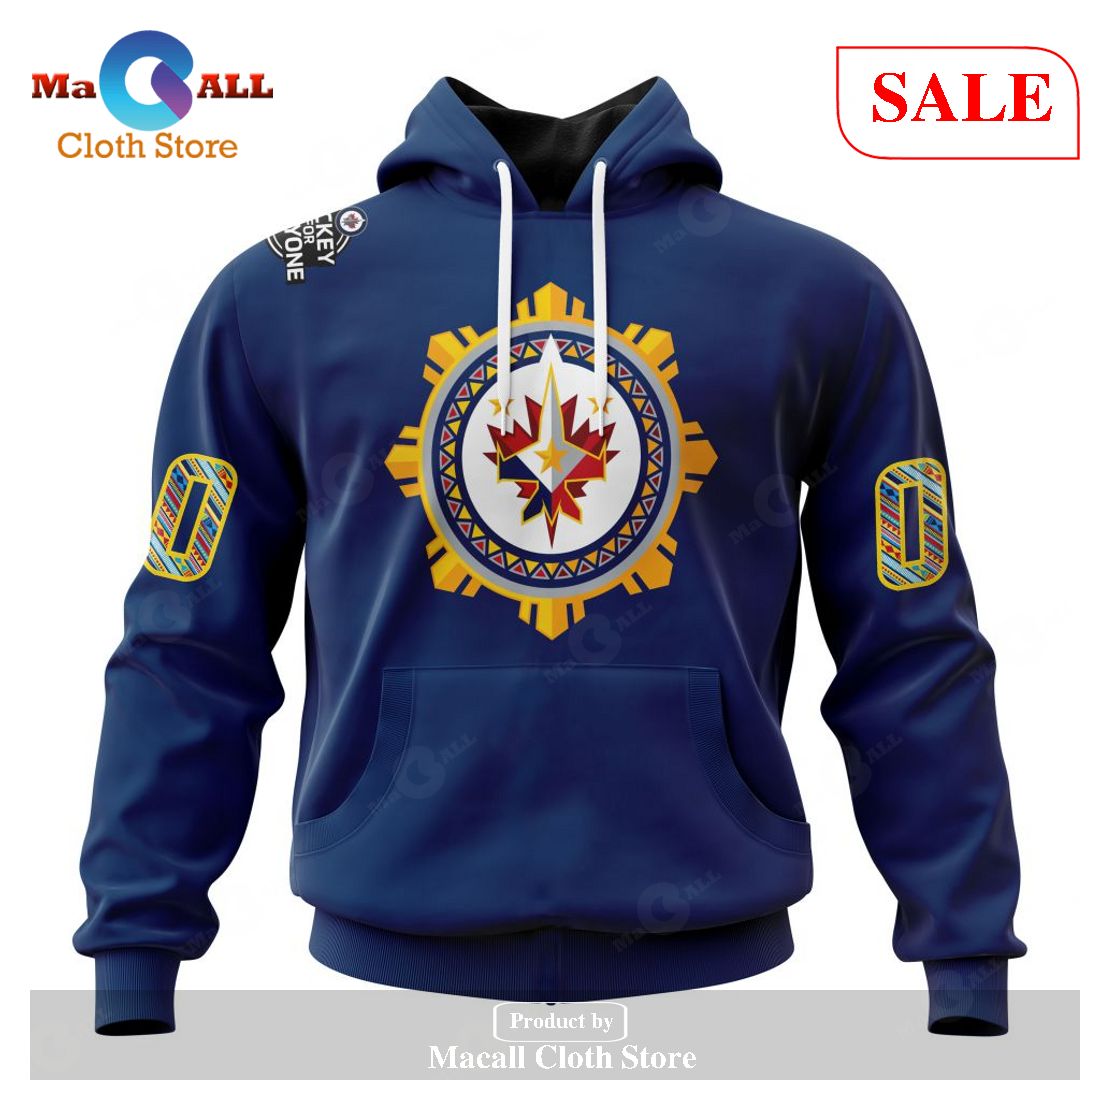 SALE] Personalized NHL Winnipeg Jets Special Retro Gradient Design Hoodie  Sweatshirt 3D LIMITED EDITION - Macall Cloth Store - Destination for  fashionistas